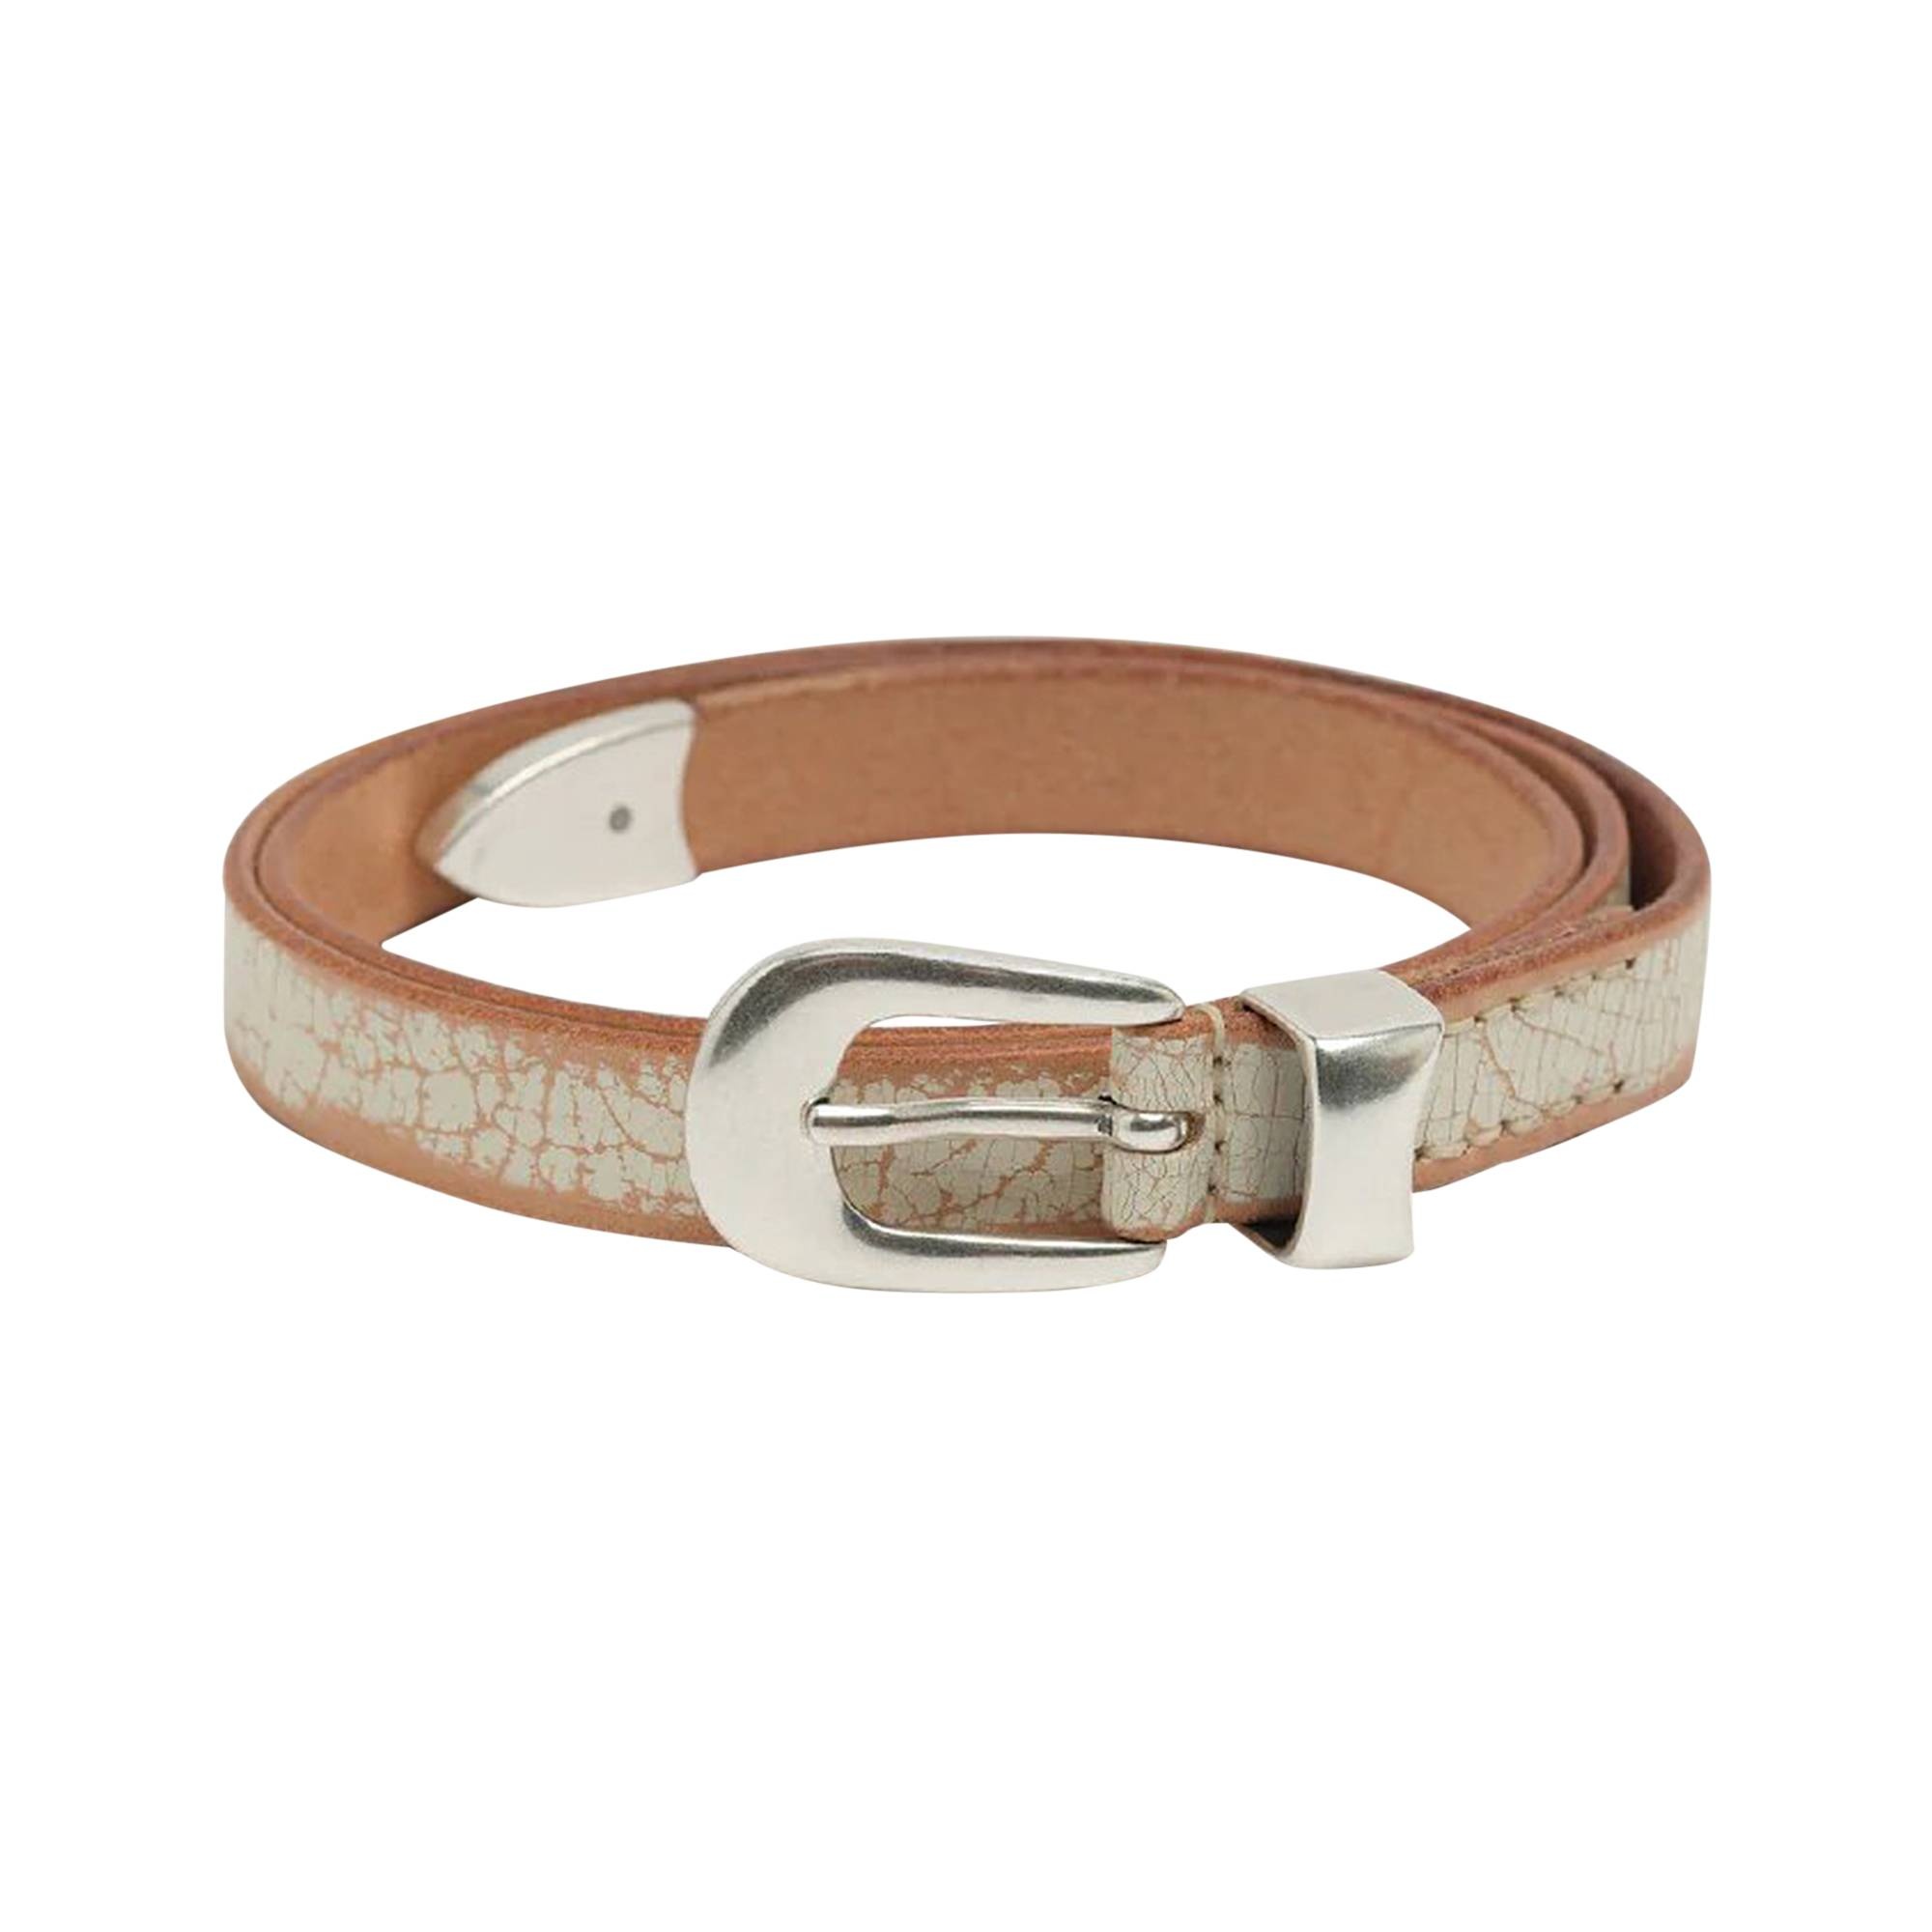 Our Legacy Cracked Leather Belt 'Cream' - 1